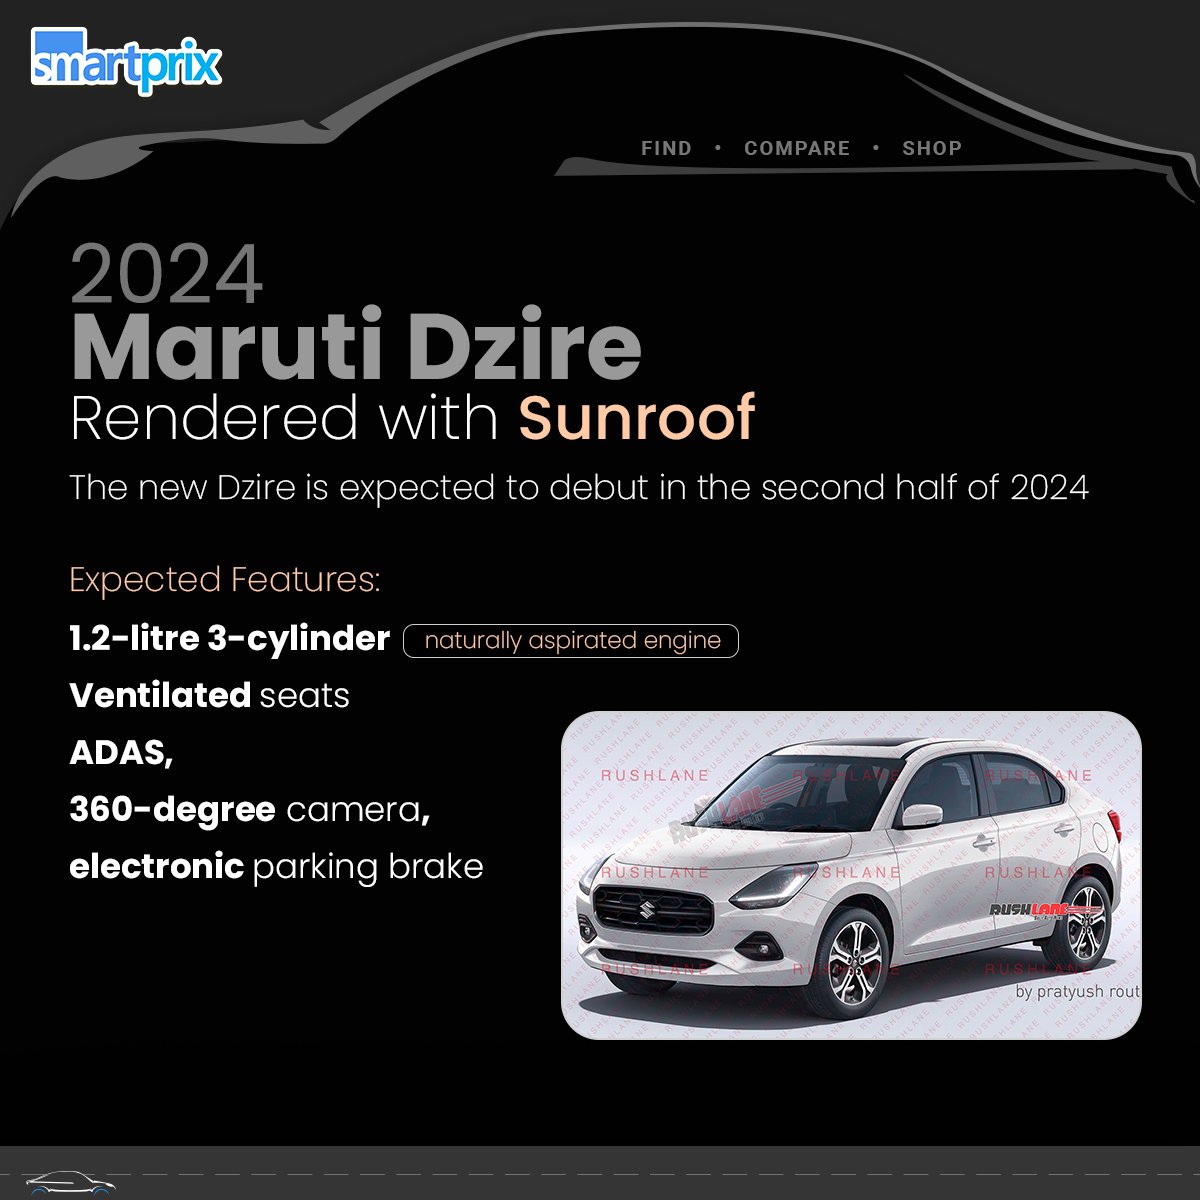 The Dzire is finally catching up on the sunroof trend. But what's your key feature for car comfort? #MarutiSuzuki #SwiftDzire #Sunroof #SmartprixCars